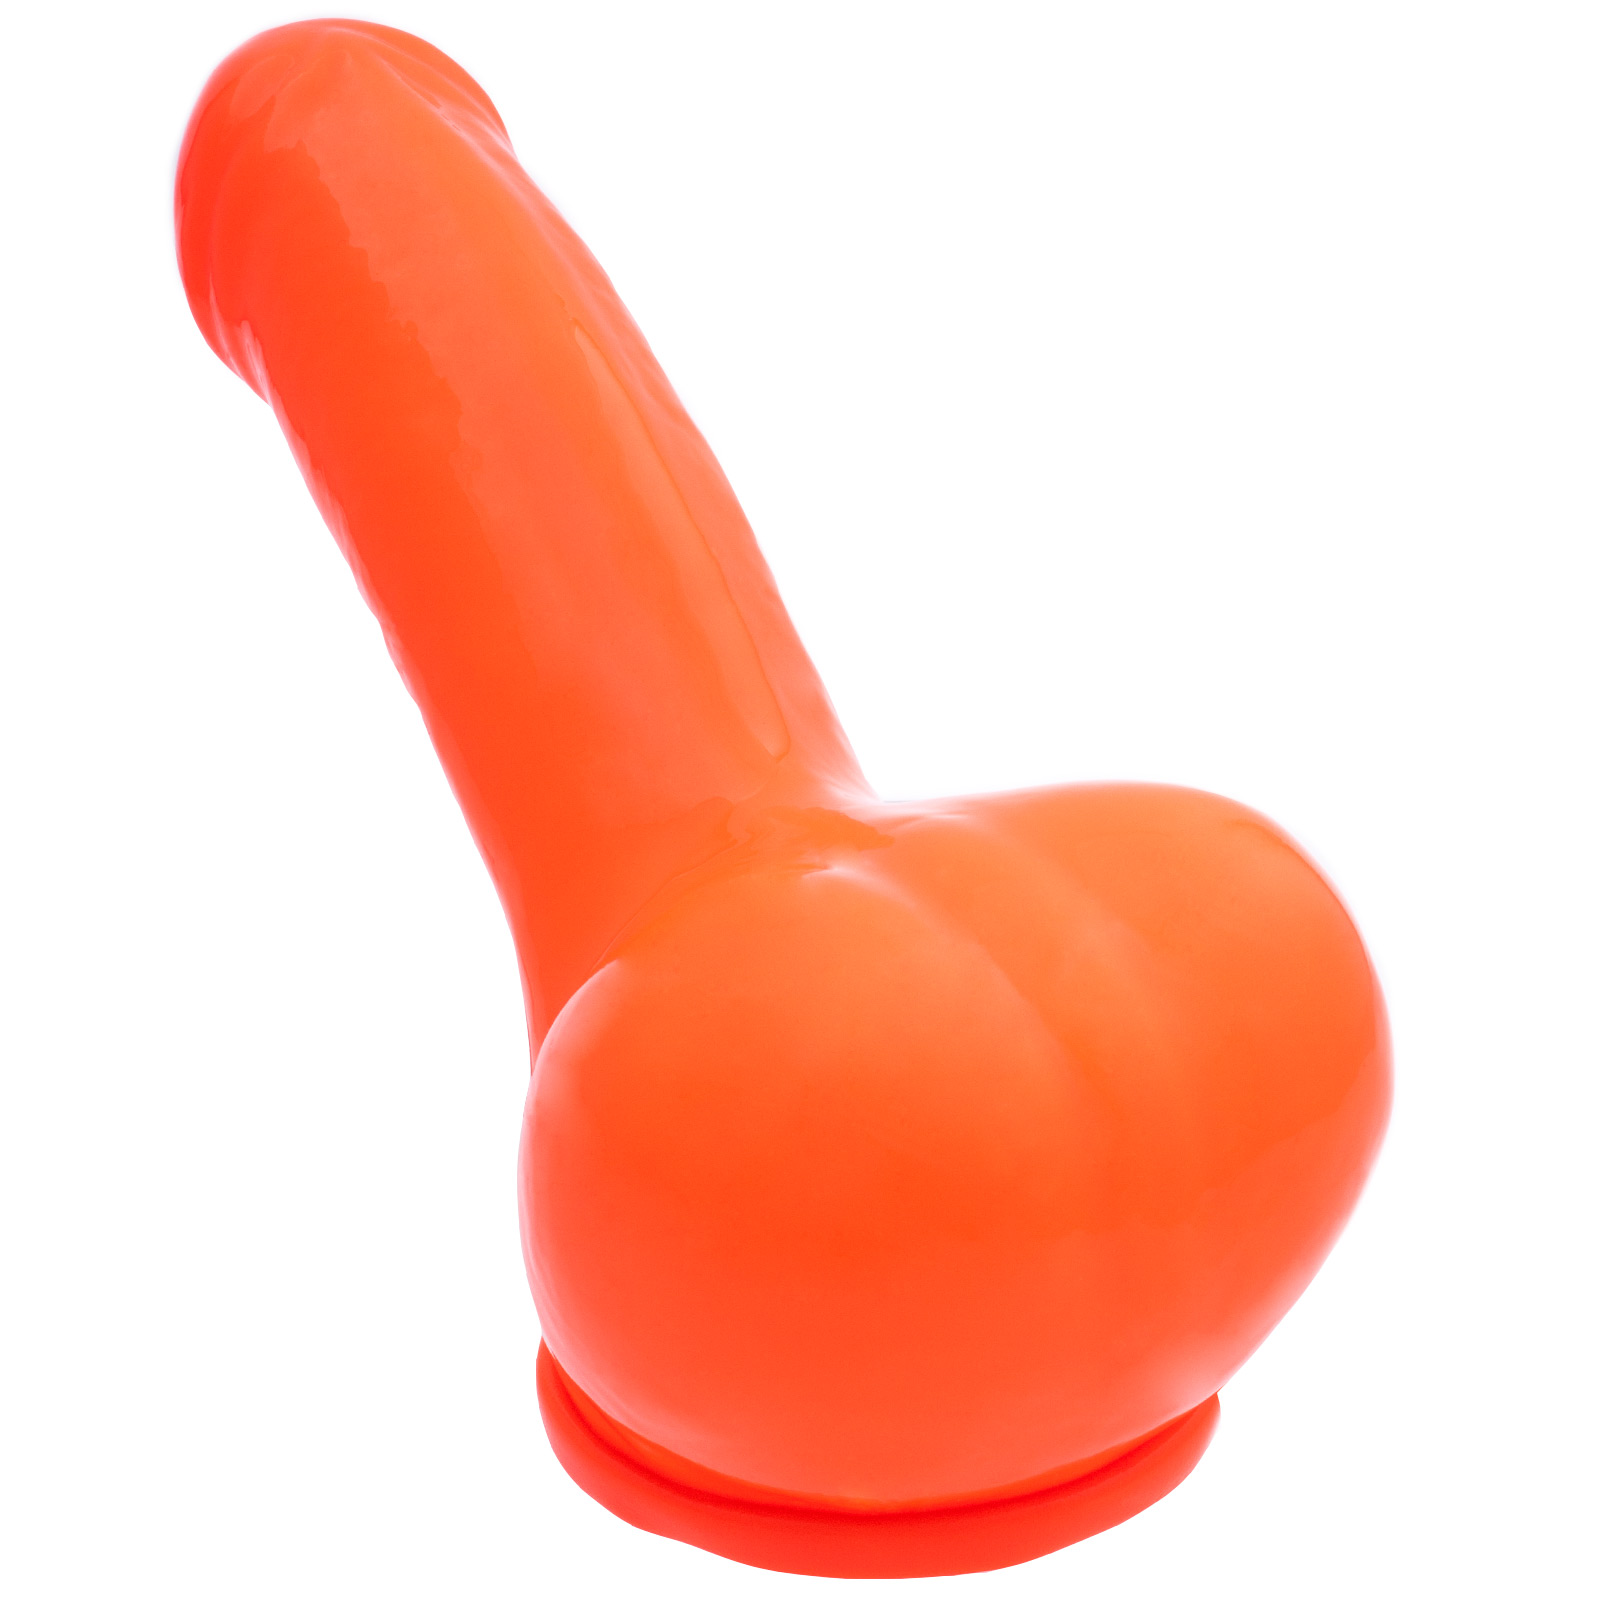 Toylie Latex Penis Sleeve «ADAM 4.5» neon orange (glow effect), with molded glans and scrotum